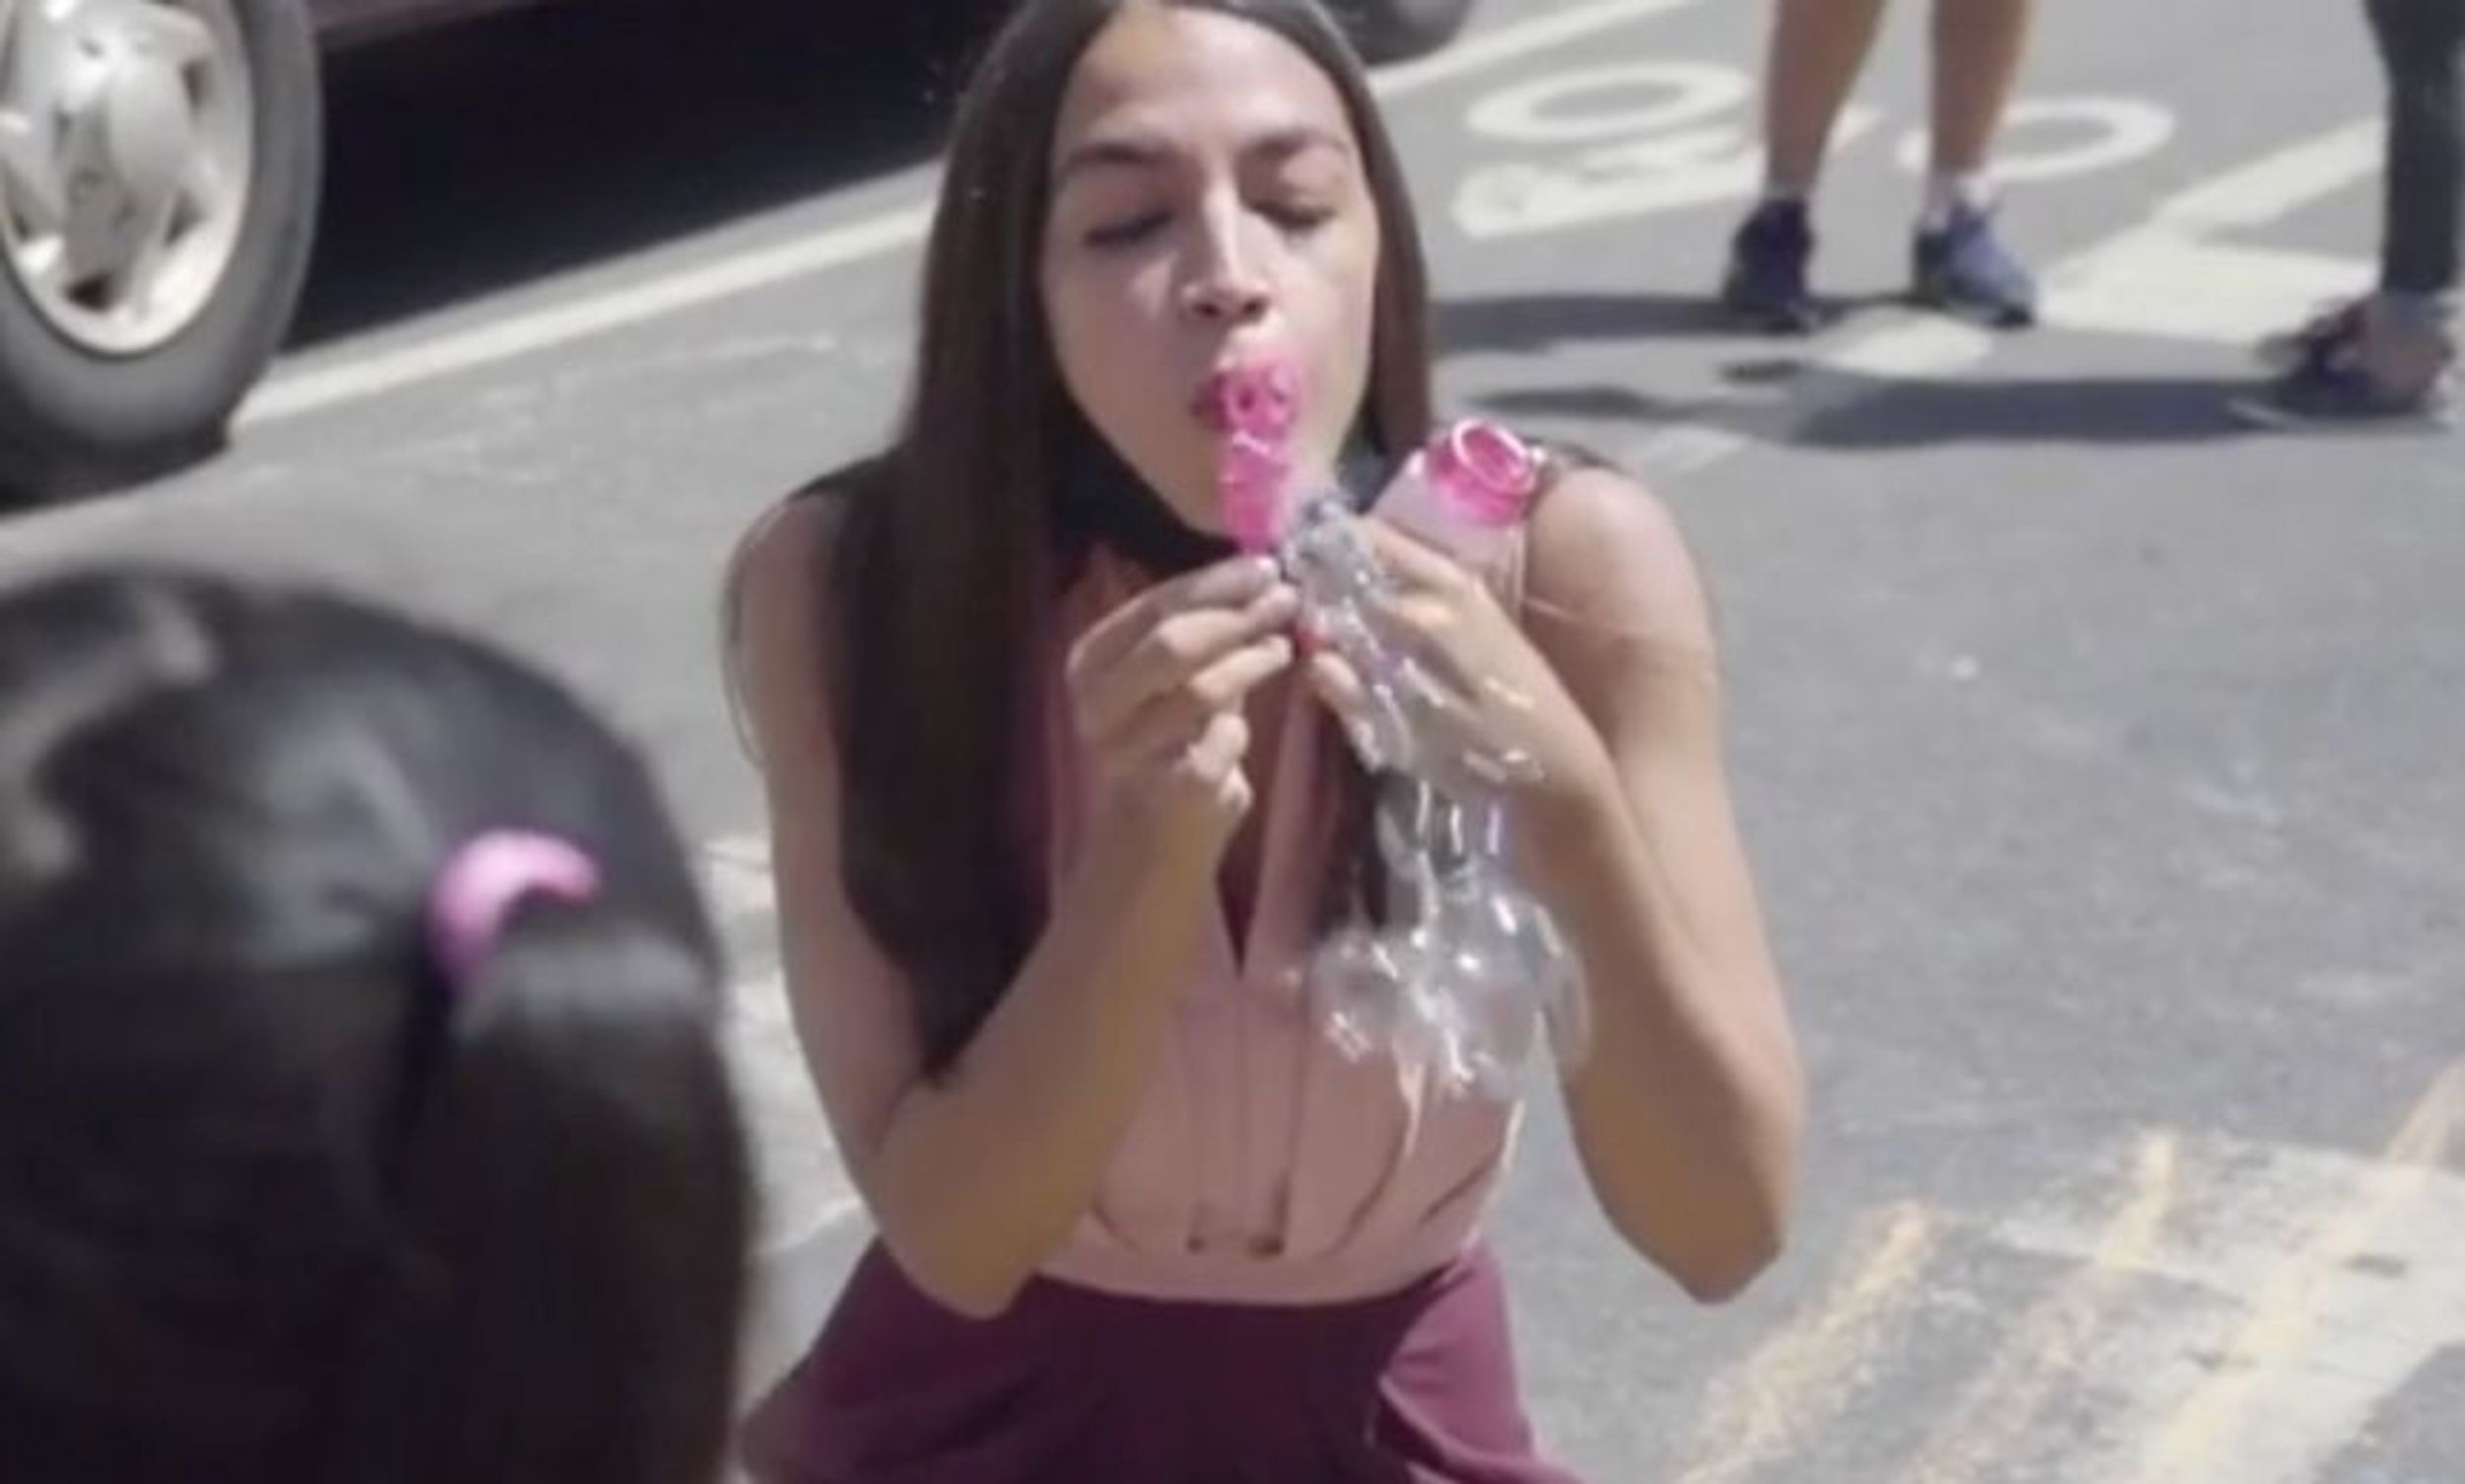 Right Wingers Tried Accusing AOC of Blowing Virus Bubbles at a Little Girl and Got Promptly Shut Down